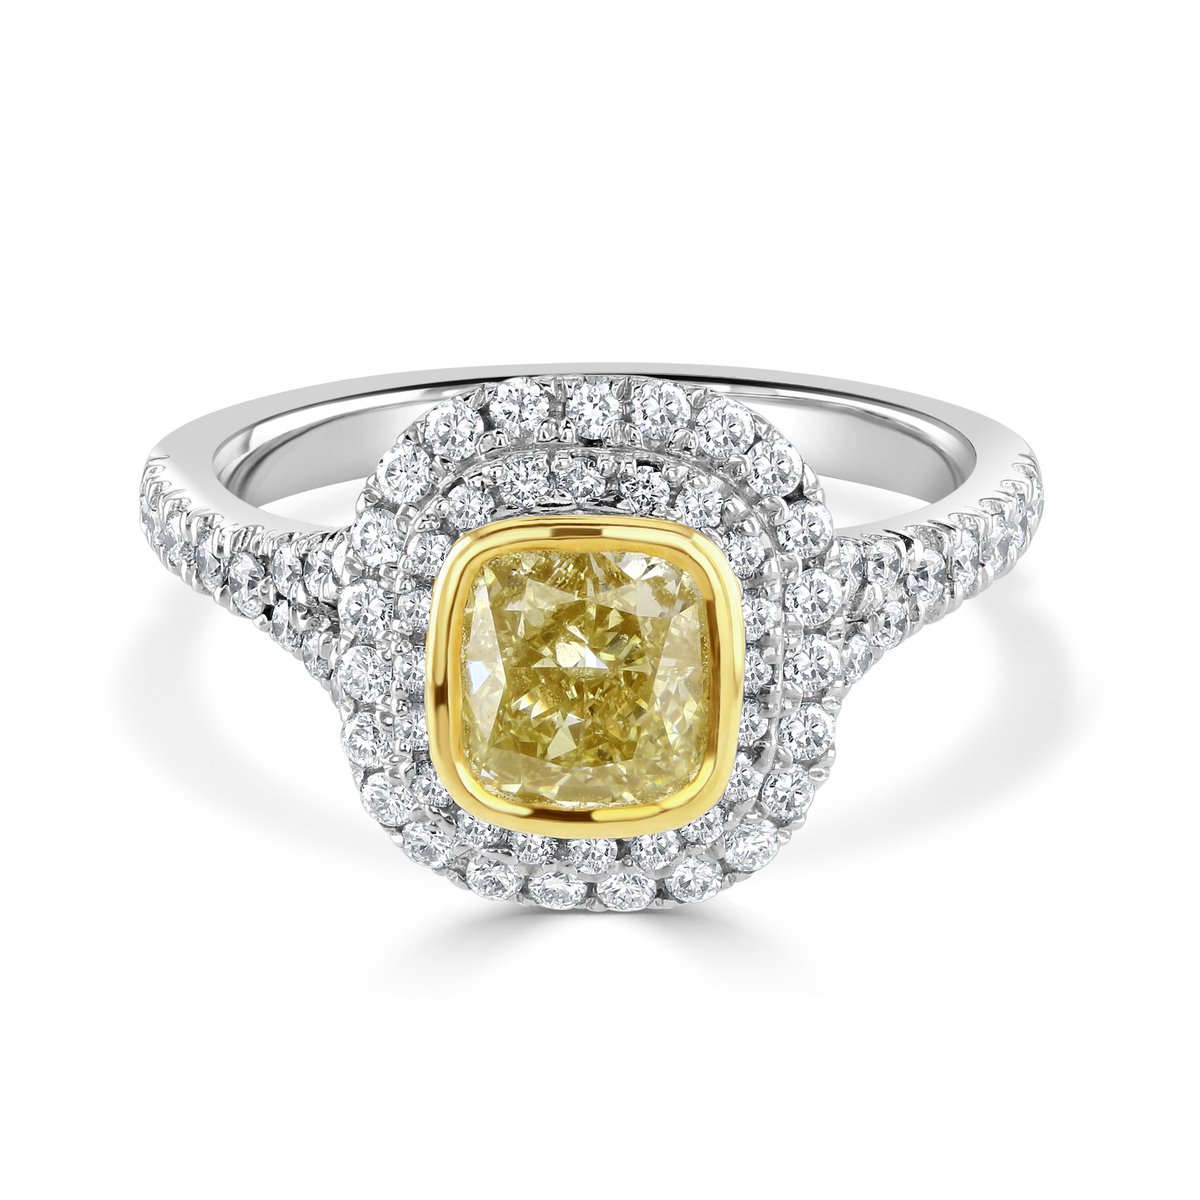 A little sunshine to take with you every day! A gorgeous yellow diamond halo ring is the perfect choice. ✨

#haloring #yellowdiamonds #engagementrings